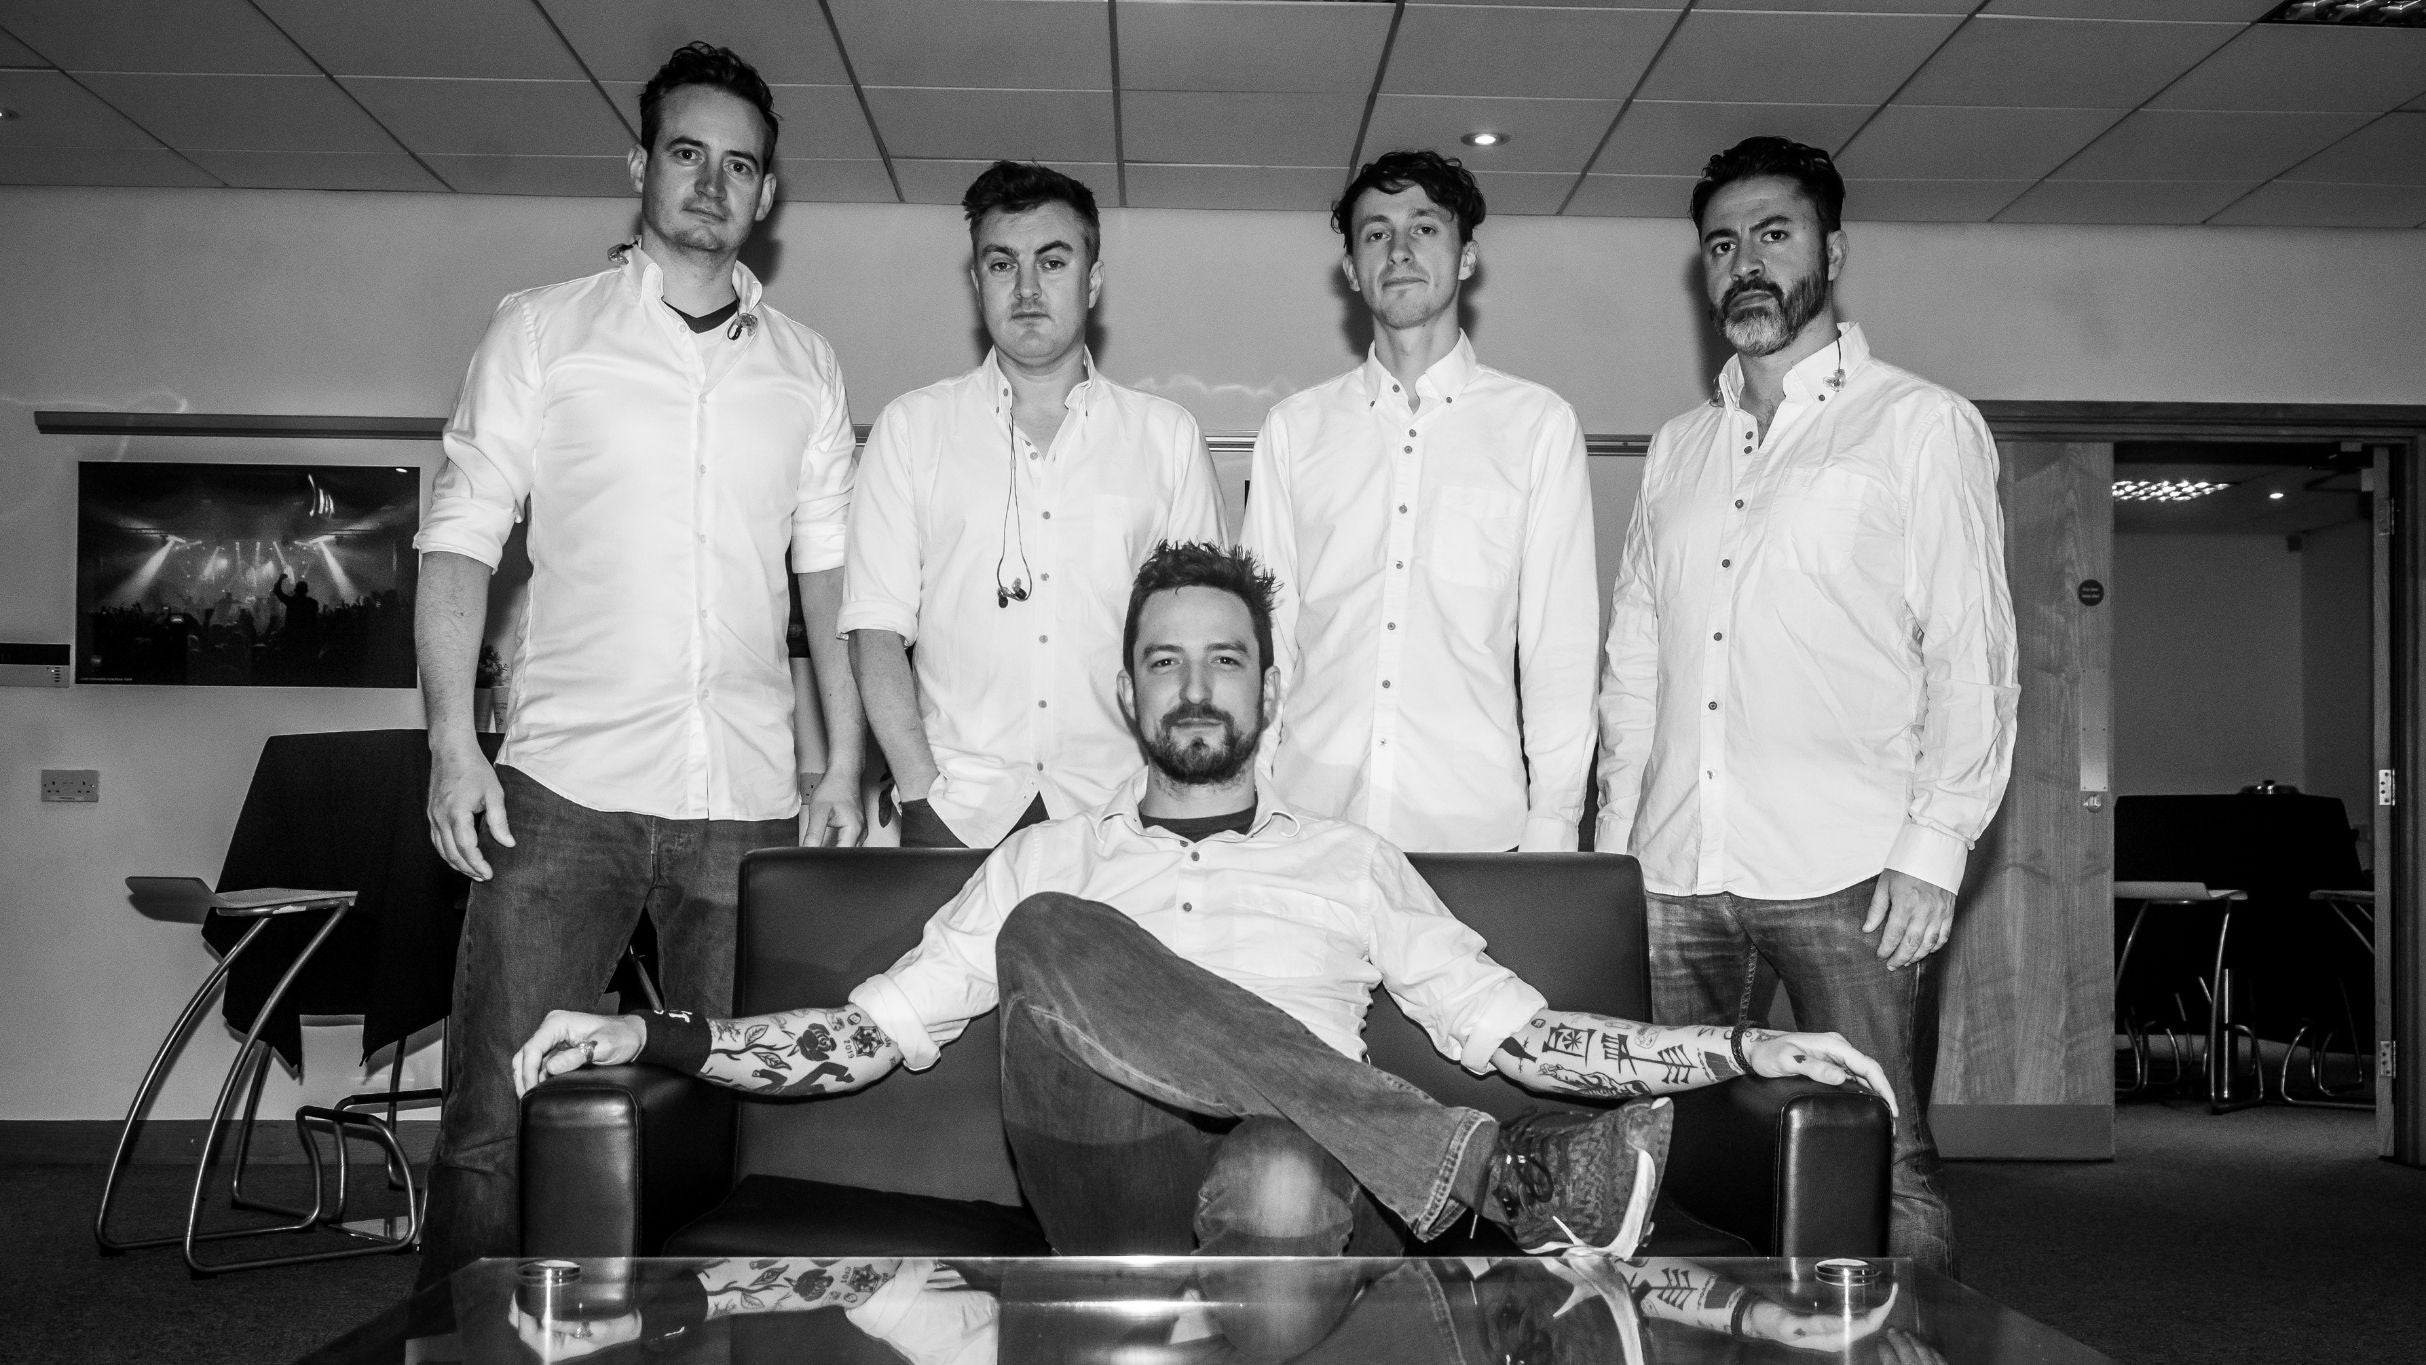 Frank Turner & the Sleeping Souls pre-sale code for event tickets in Calgary, AB (Grey Eagle Event Centre)